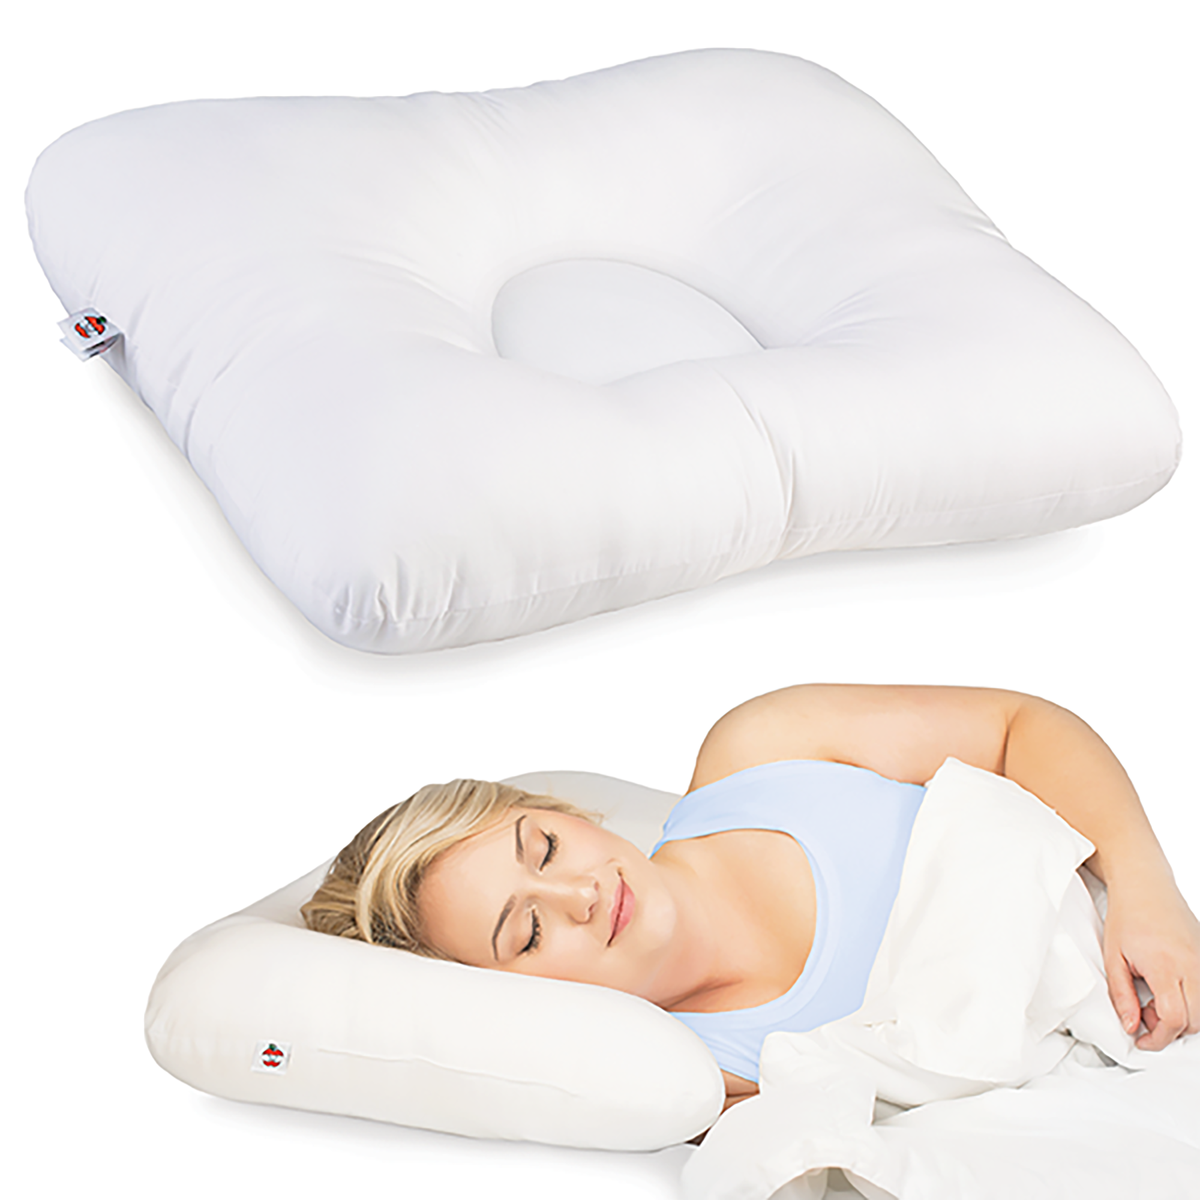 Pillows For Ear Pressure Sores: Comfort and Support for Sensitive Ears